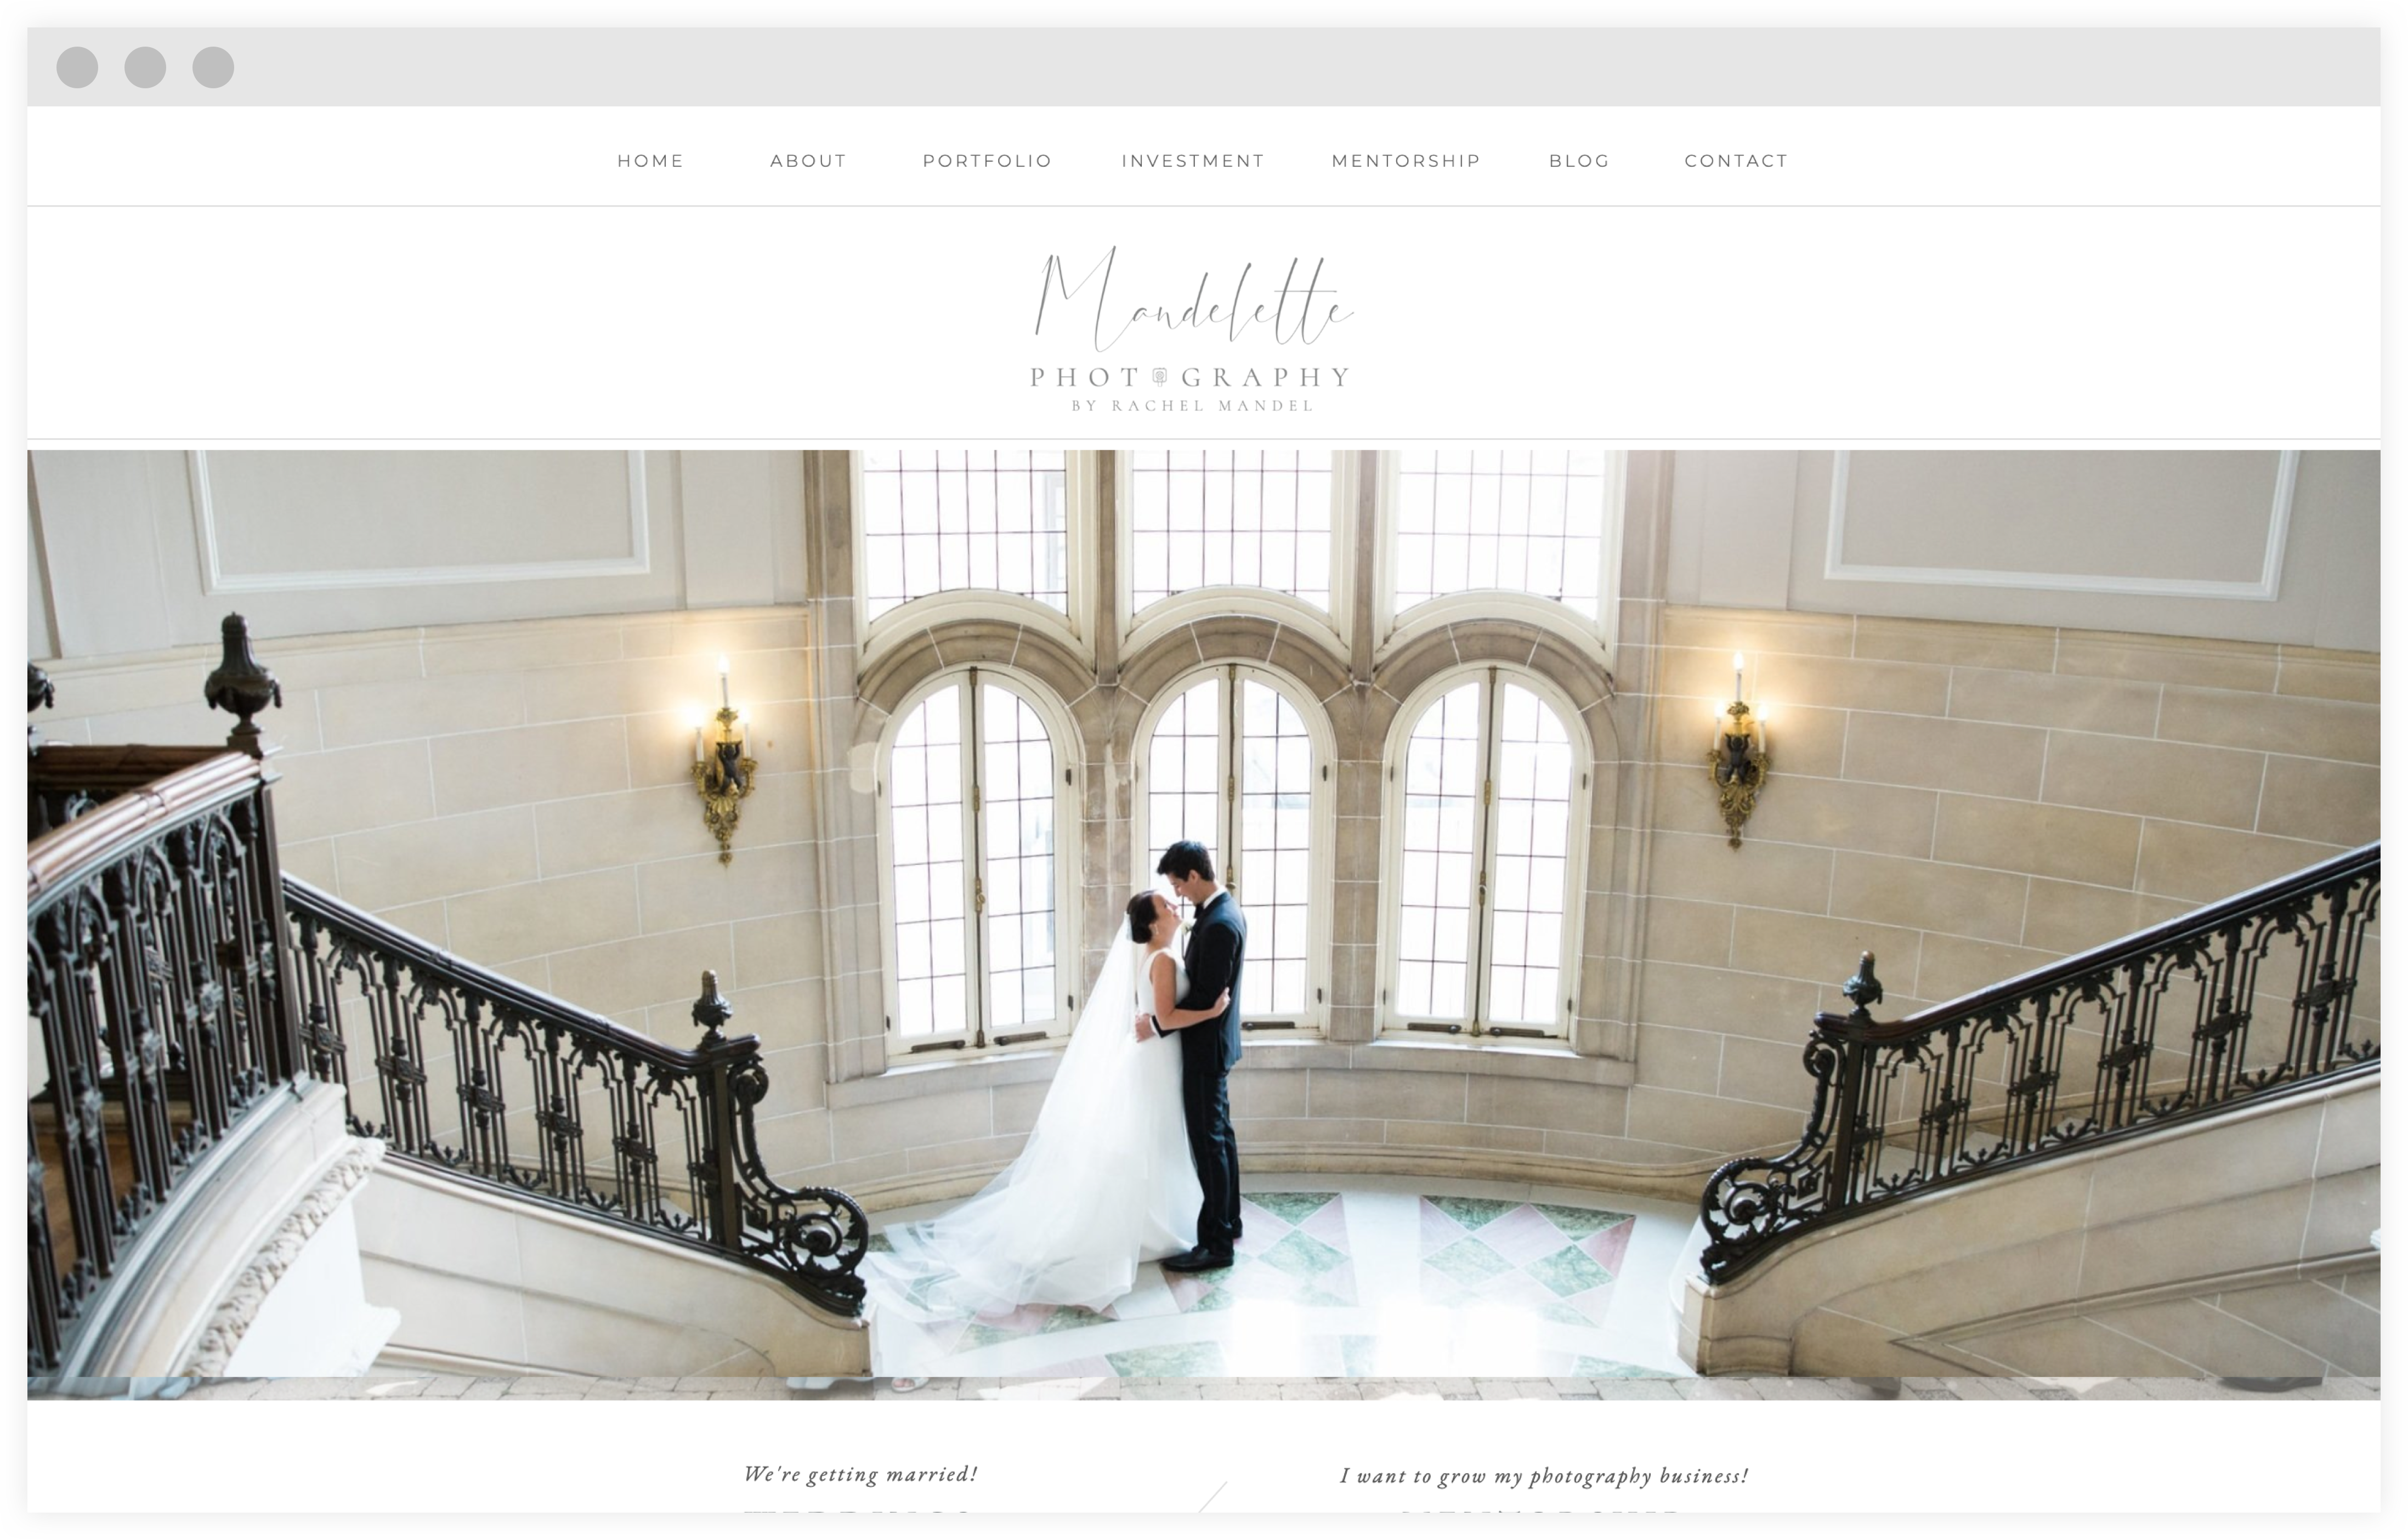 Wedding photographer Showit website home page